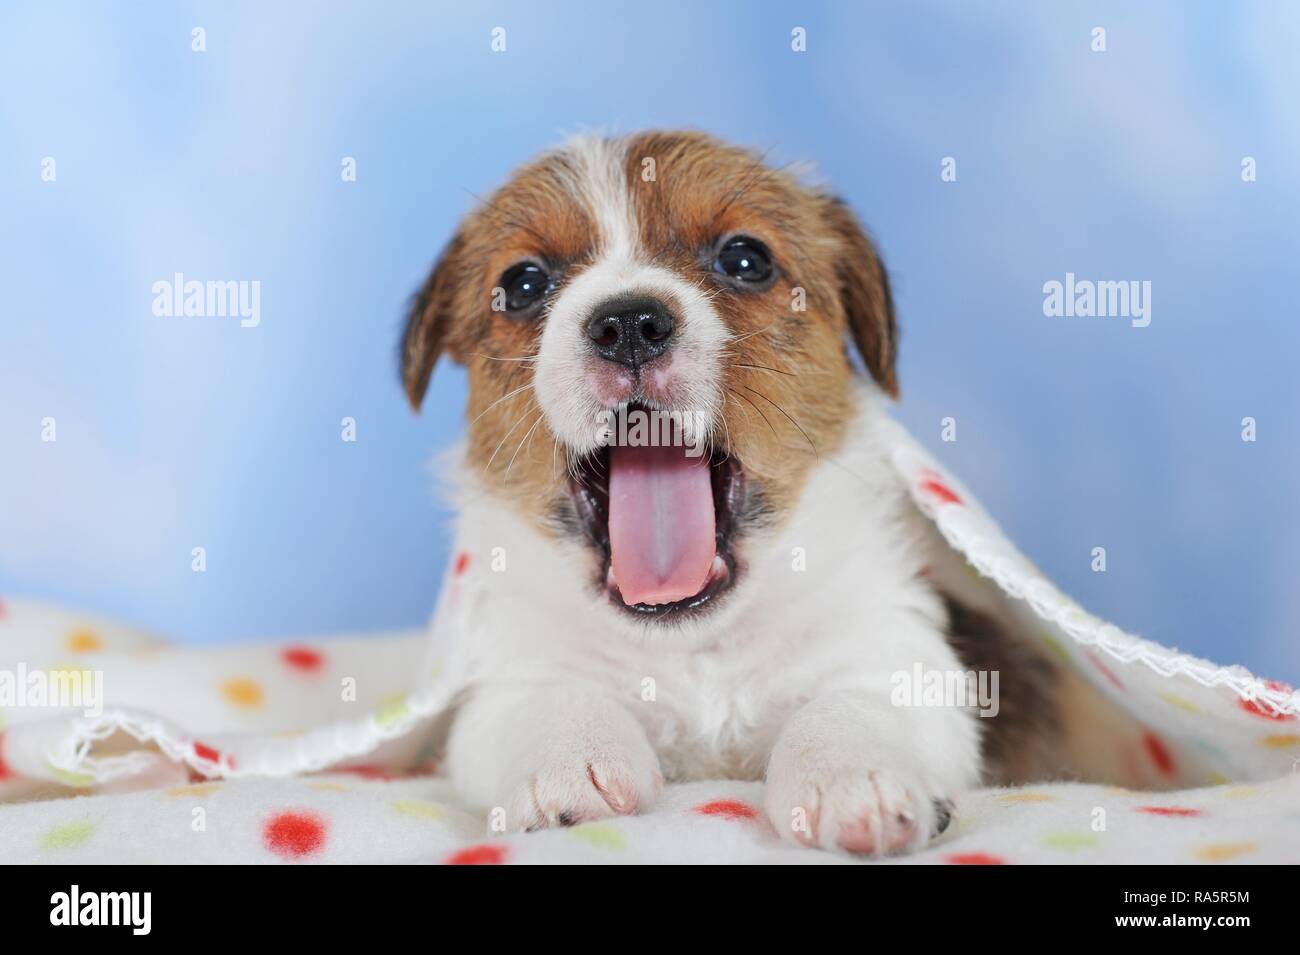 Jack Russell Terrier, brown white, puppy 5 weeks, lies on spotted blanket, yawning, Austria Stock Photo